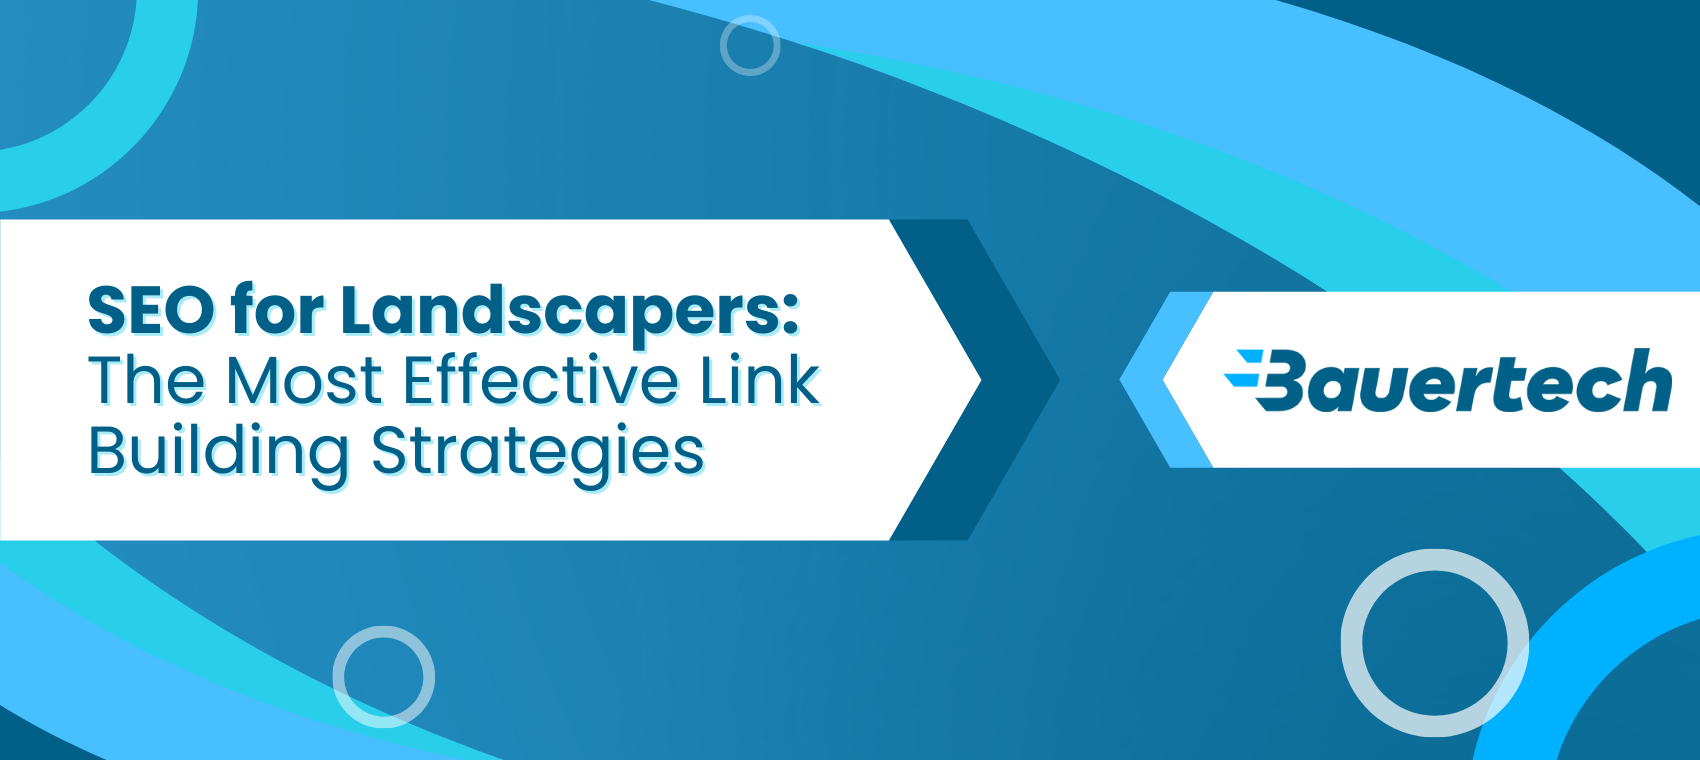 The 10 Most Effective Link Building Strategies to Optimize Your SEO for Landscapers.